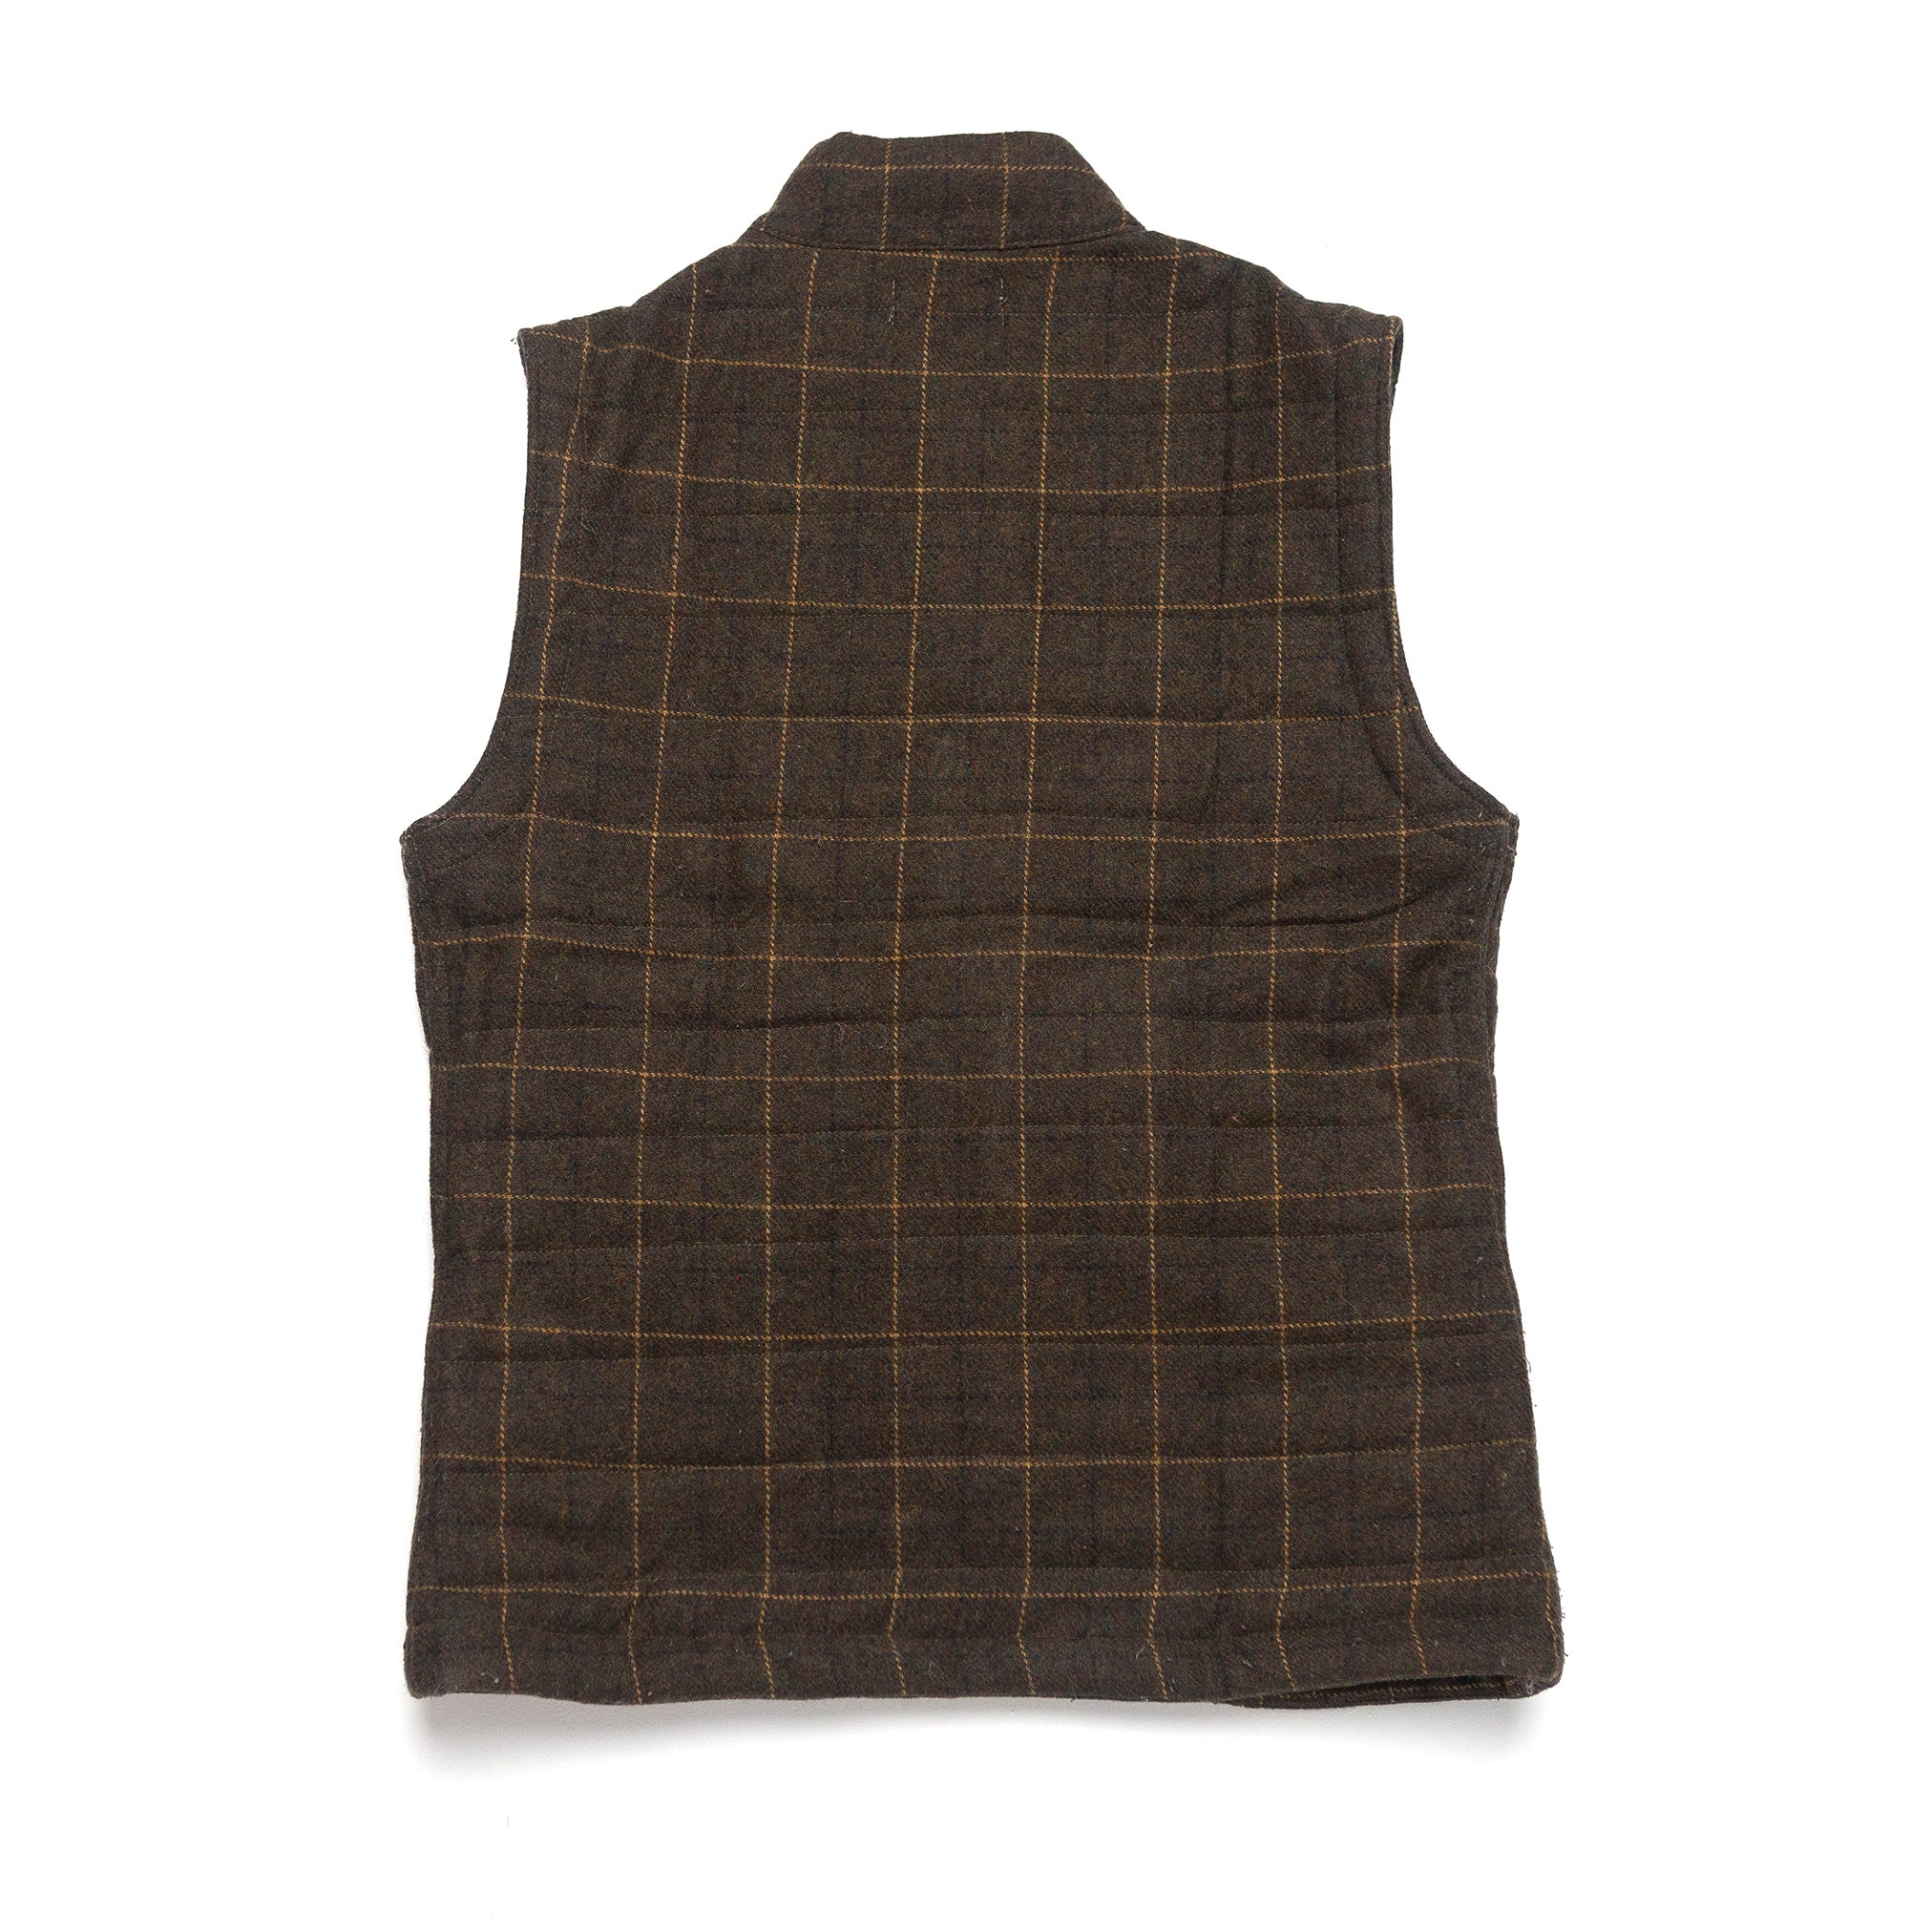 The Vertical Vest in Green Plaid Wool